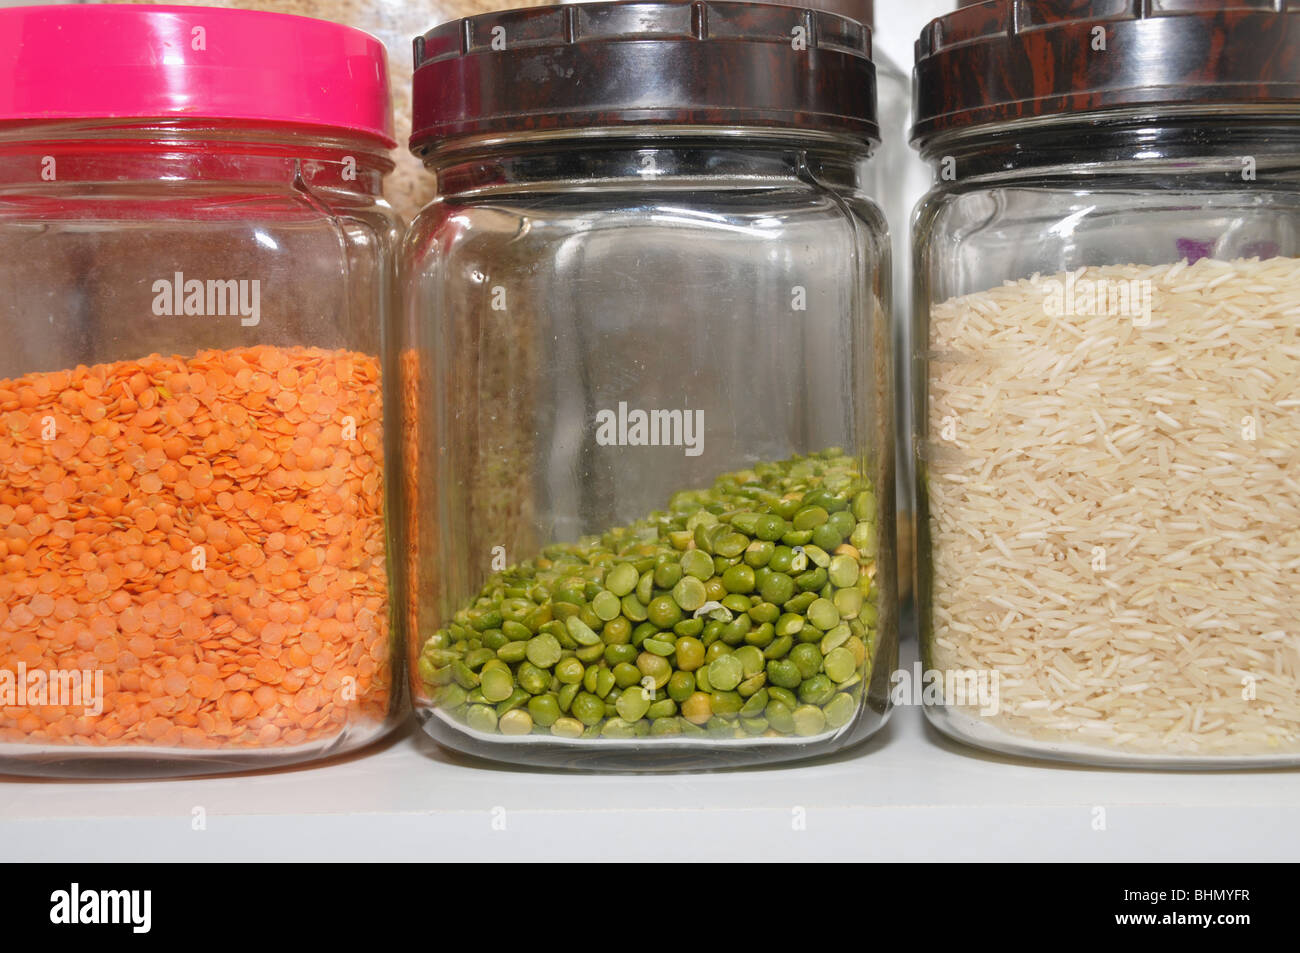 Three glass jars holding rice, and red and green lentils. Stock Photo